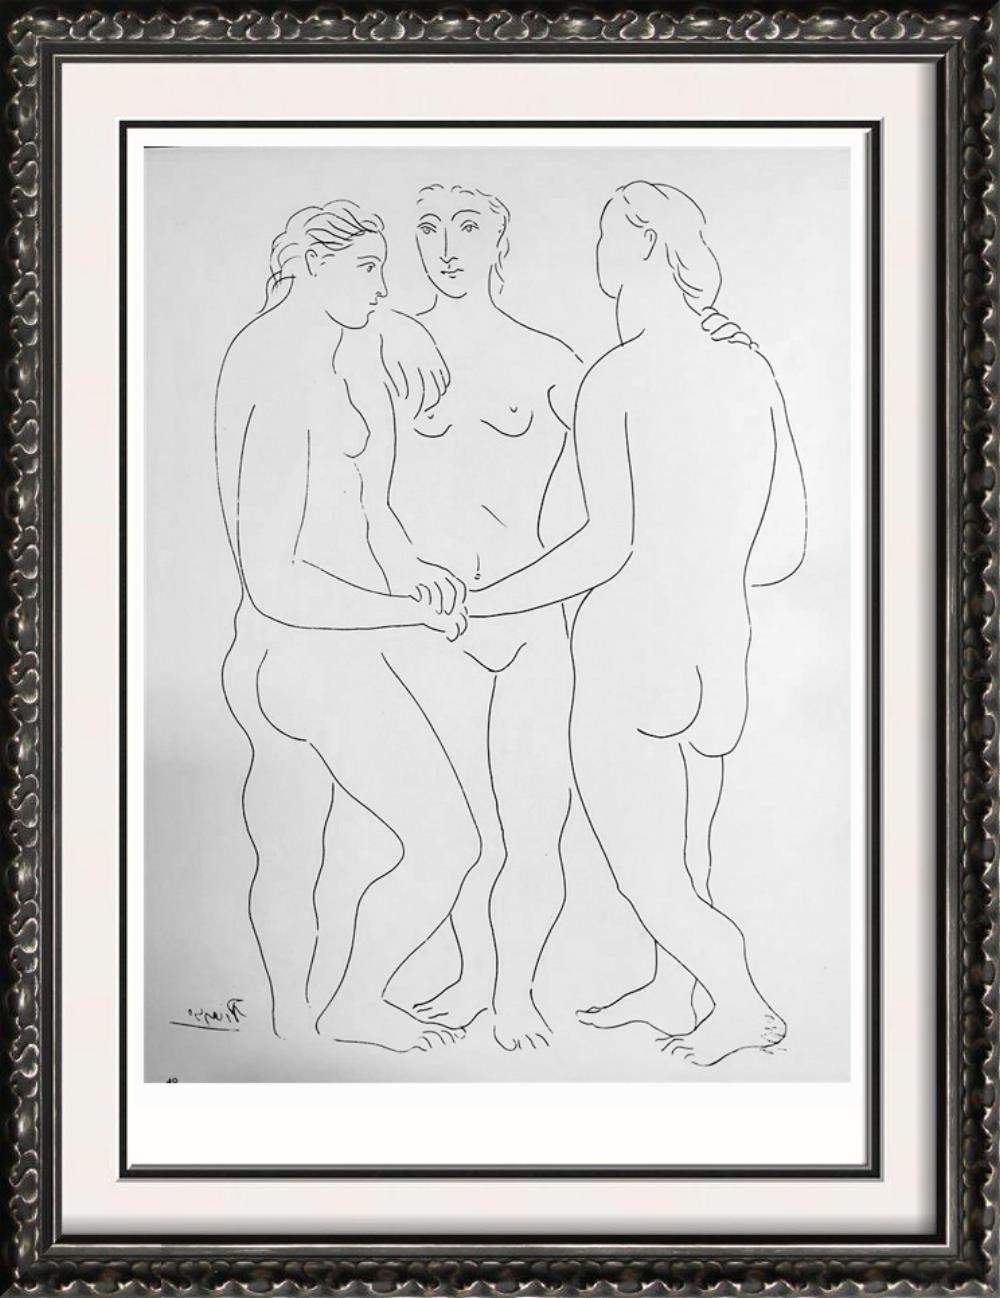 Pablo Picasso The Three Friends c. 1927 Fine Art Print from Museum Artist